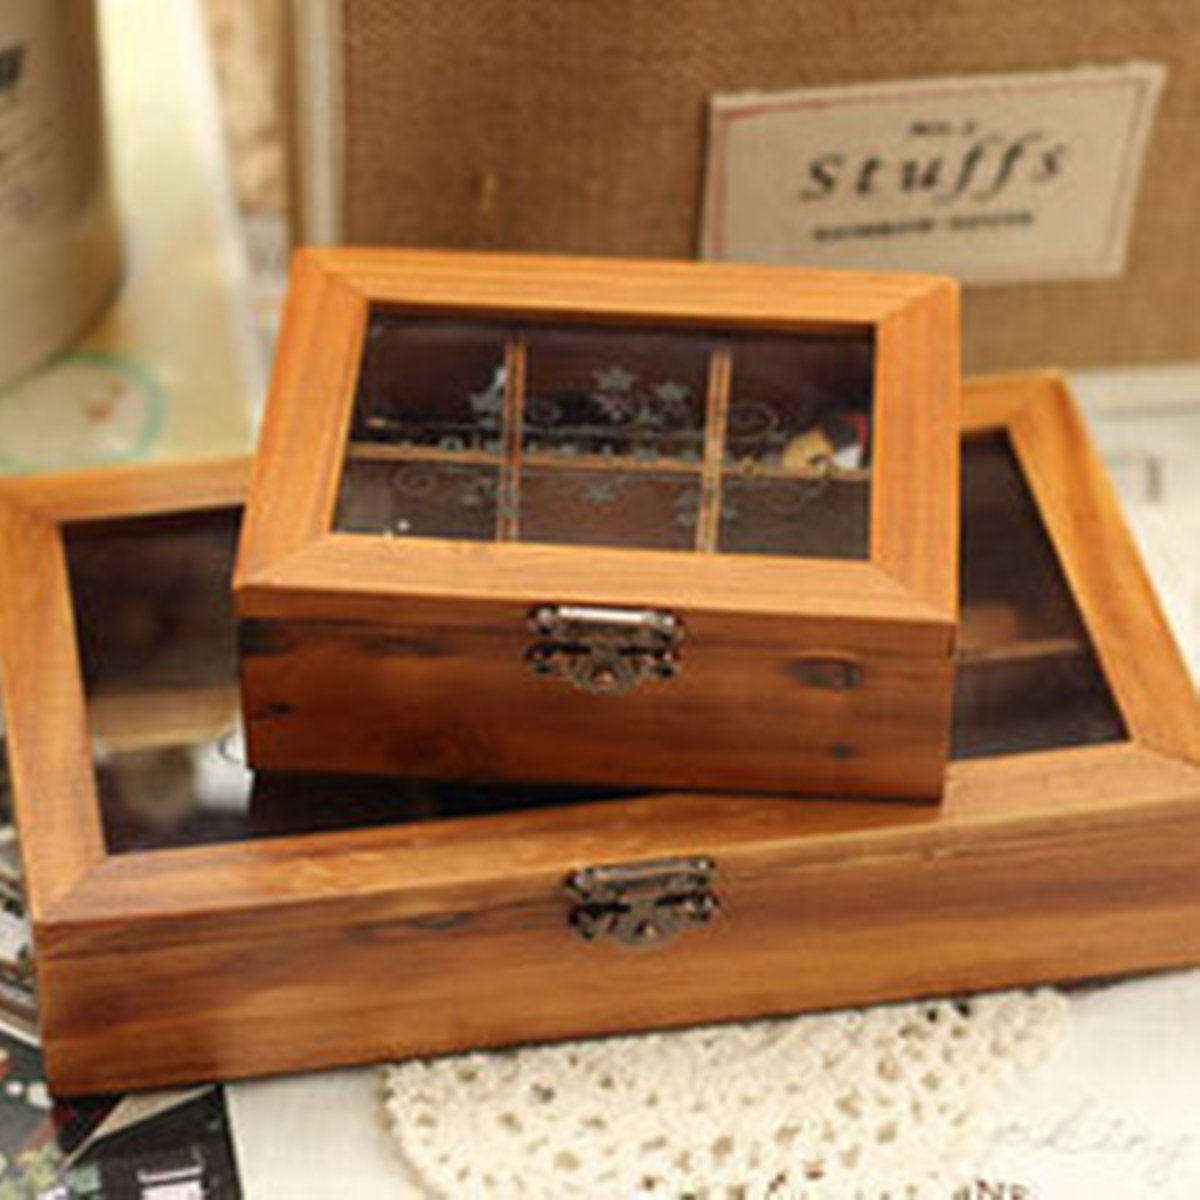 1pc Retro Vintage Wood Wooden Clear Cover Jewelry Box Storage Organiser New Storage Container